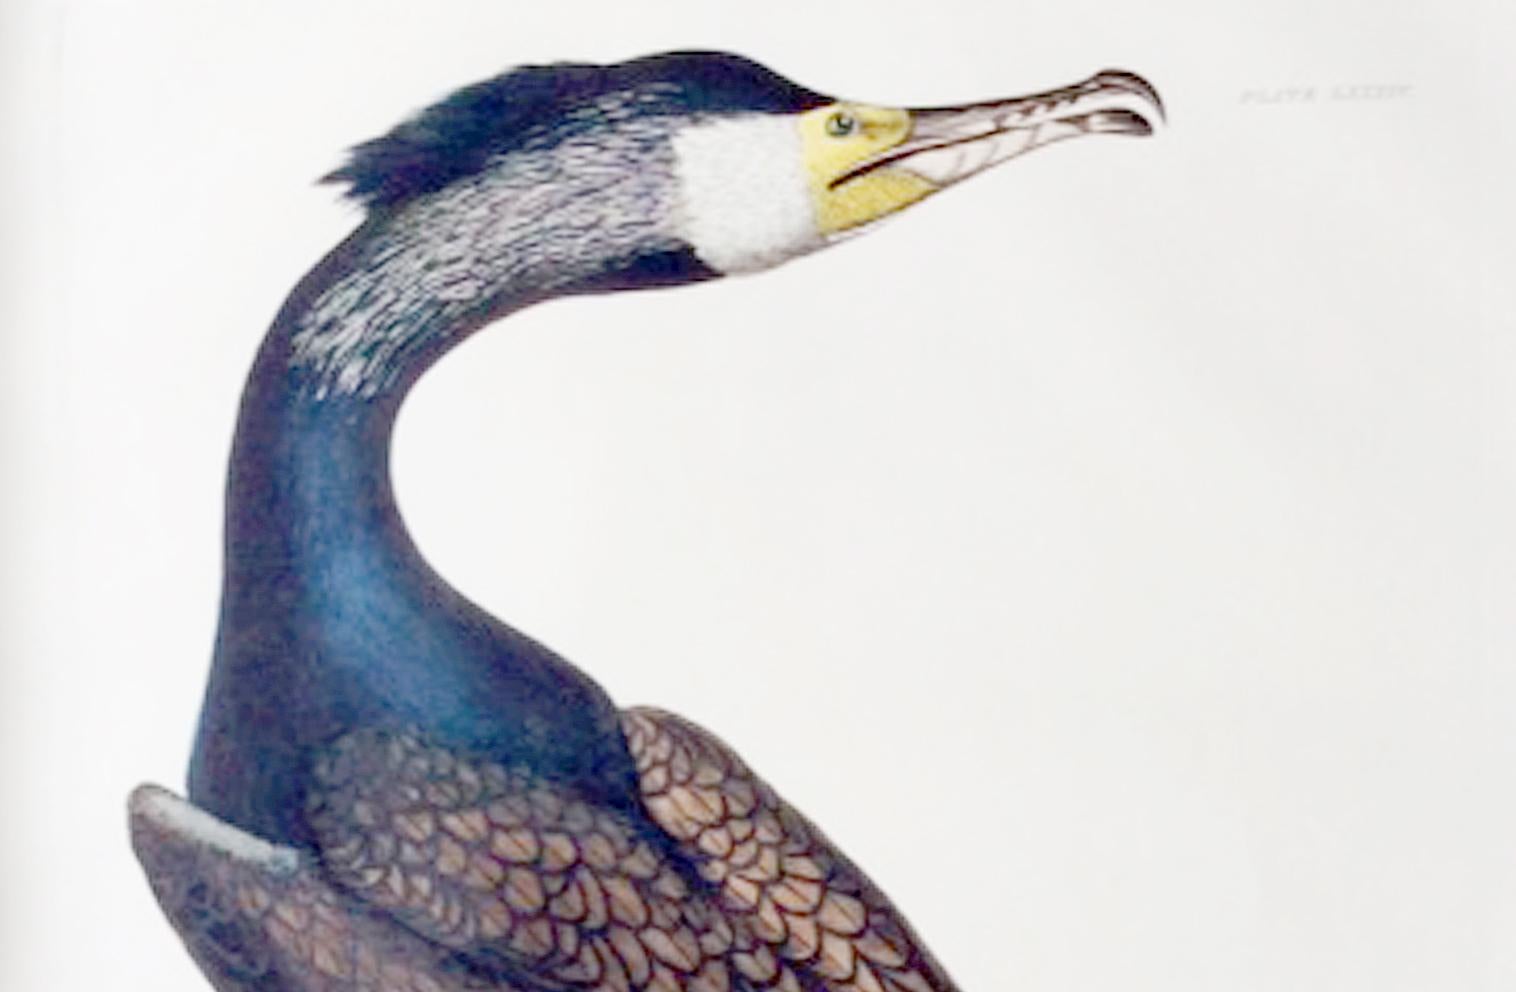 Georgian Prideaux John Selby Large Hand-Colored Copper Plate Engraving of a Cormorant